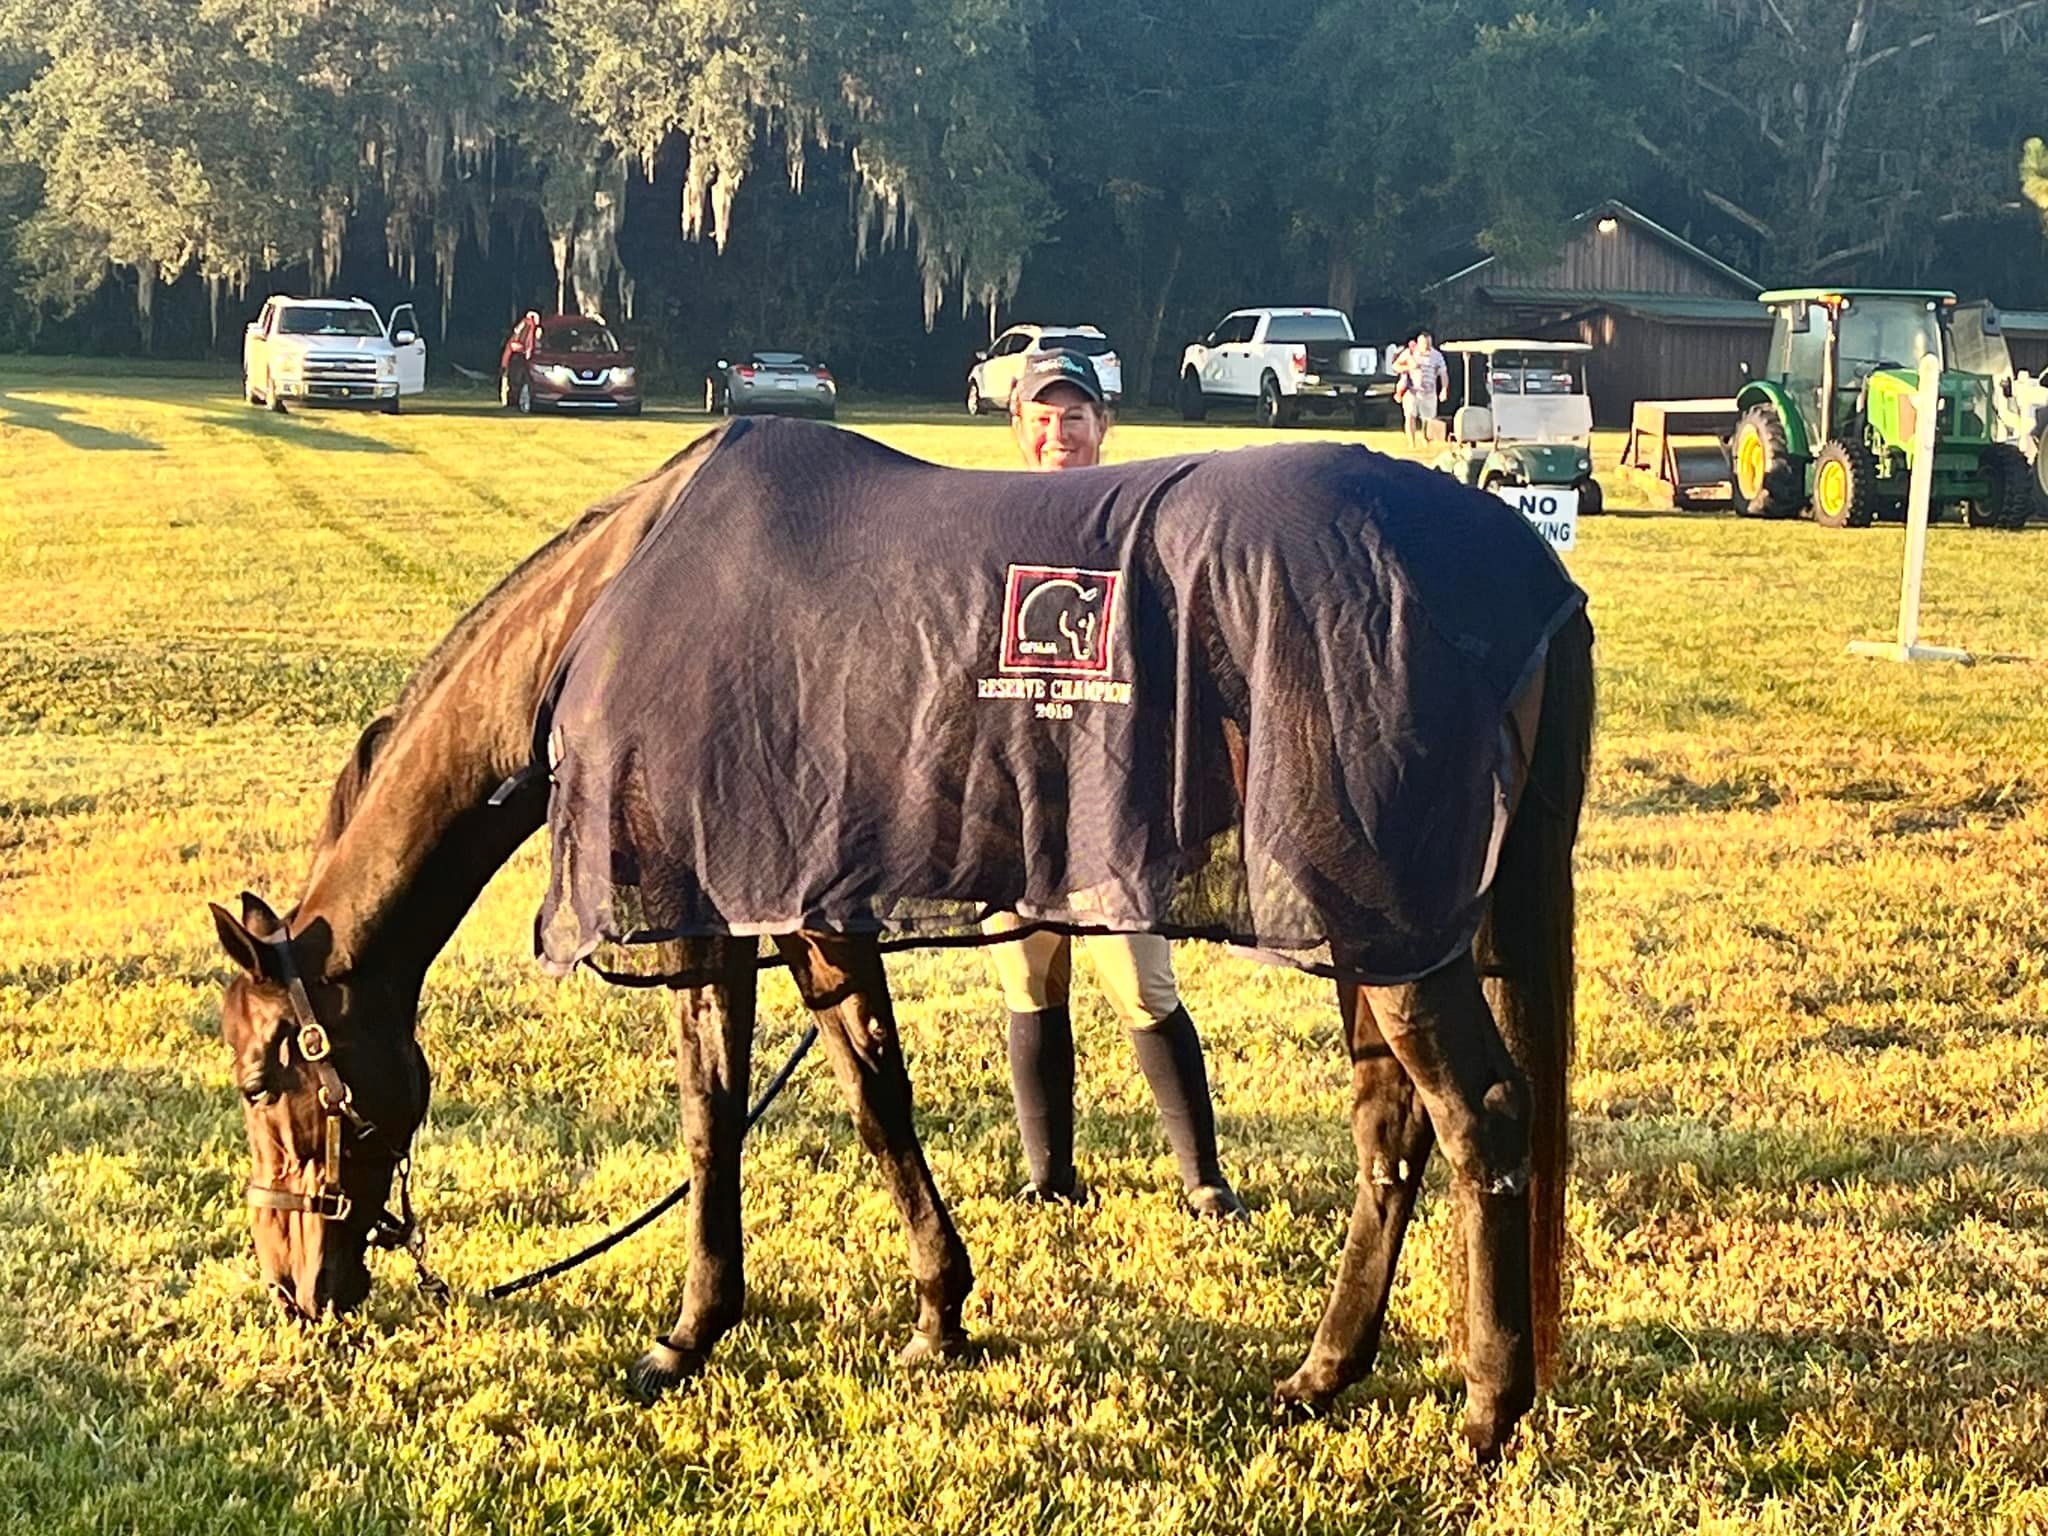 Horse Show morning at The Grand Oaks Resort in Weirsdale, Florida